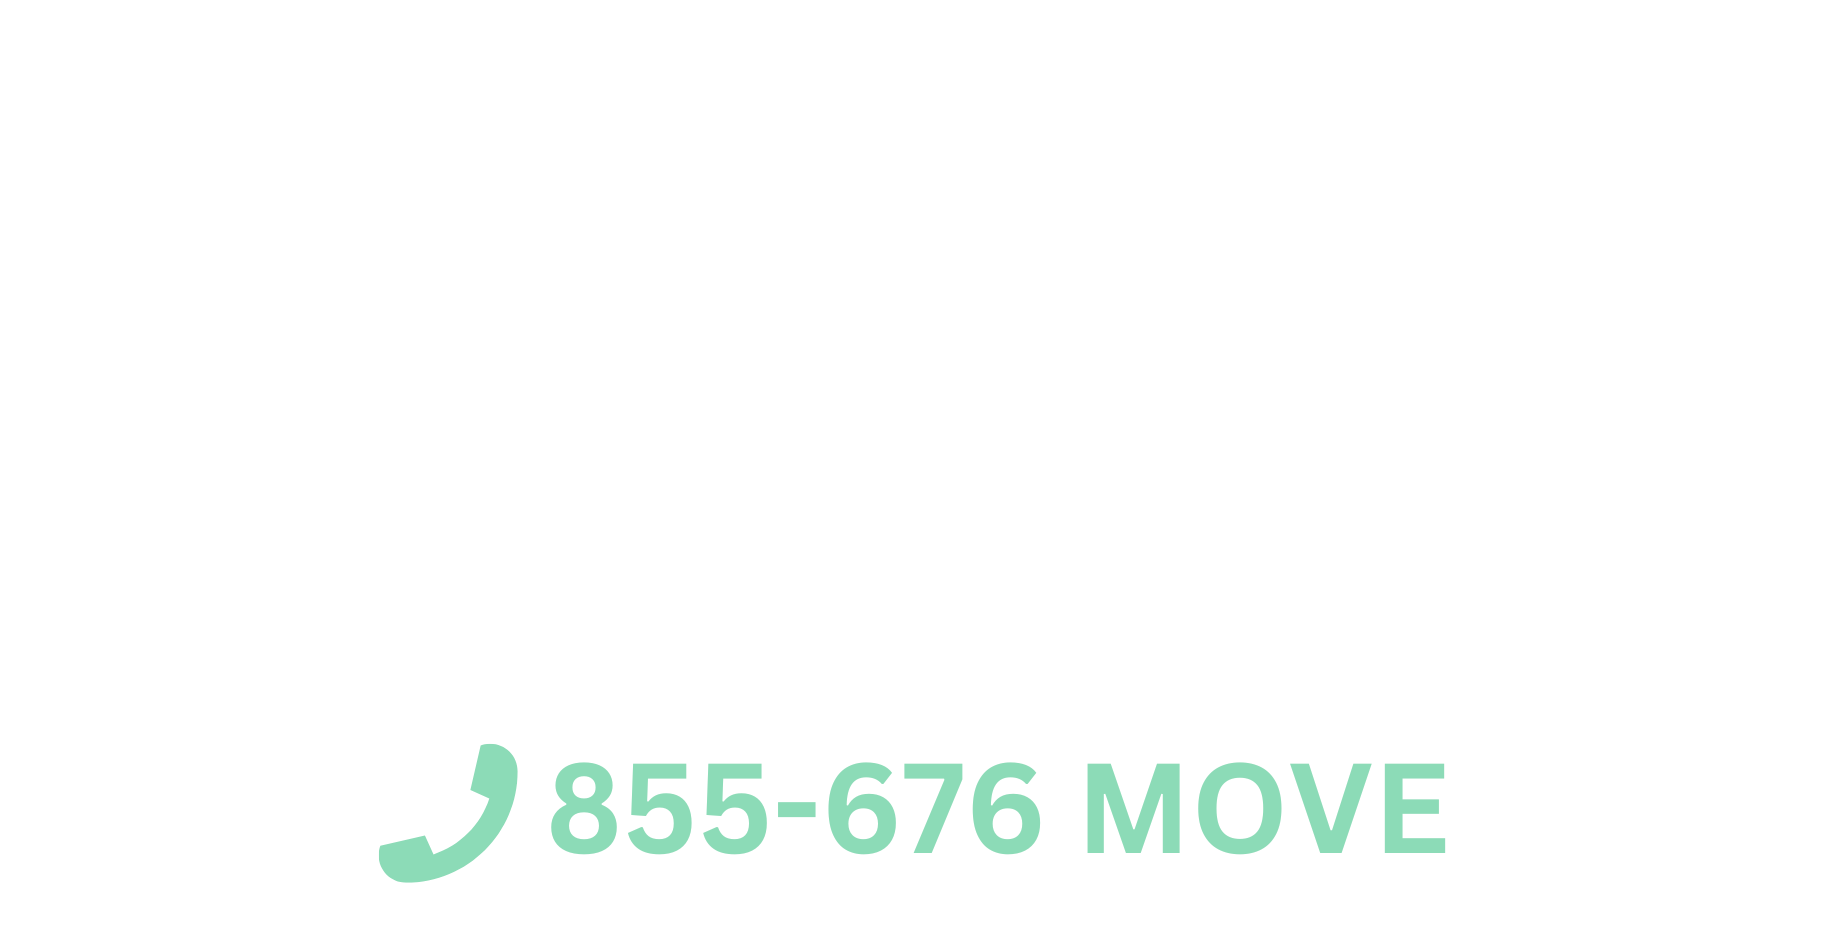 All Service Moving Logo